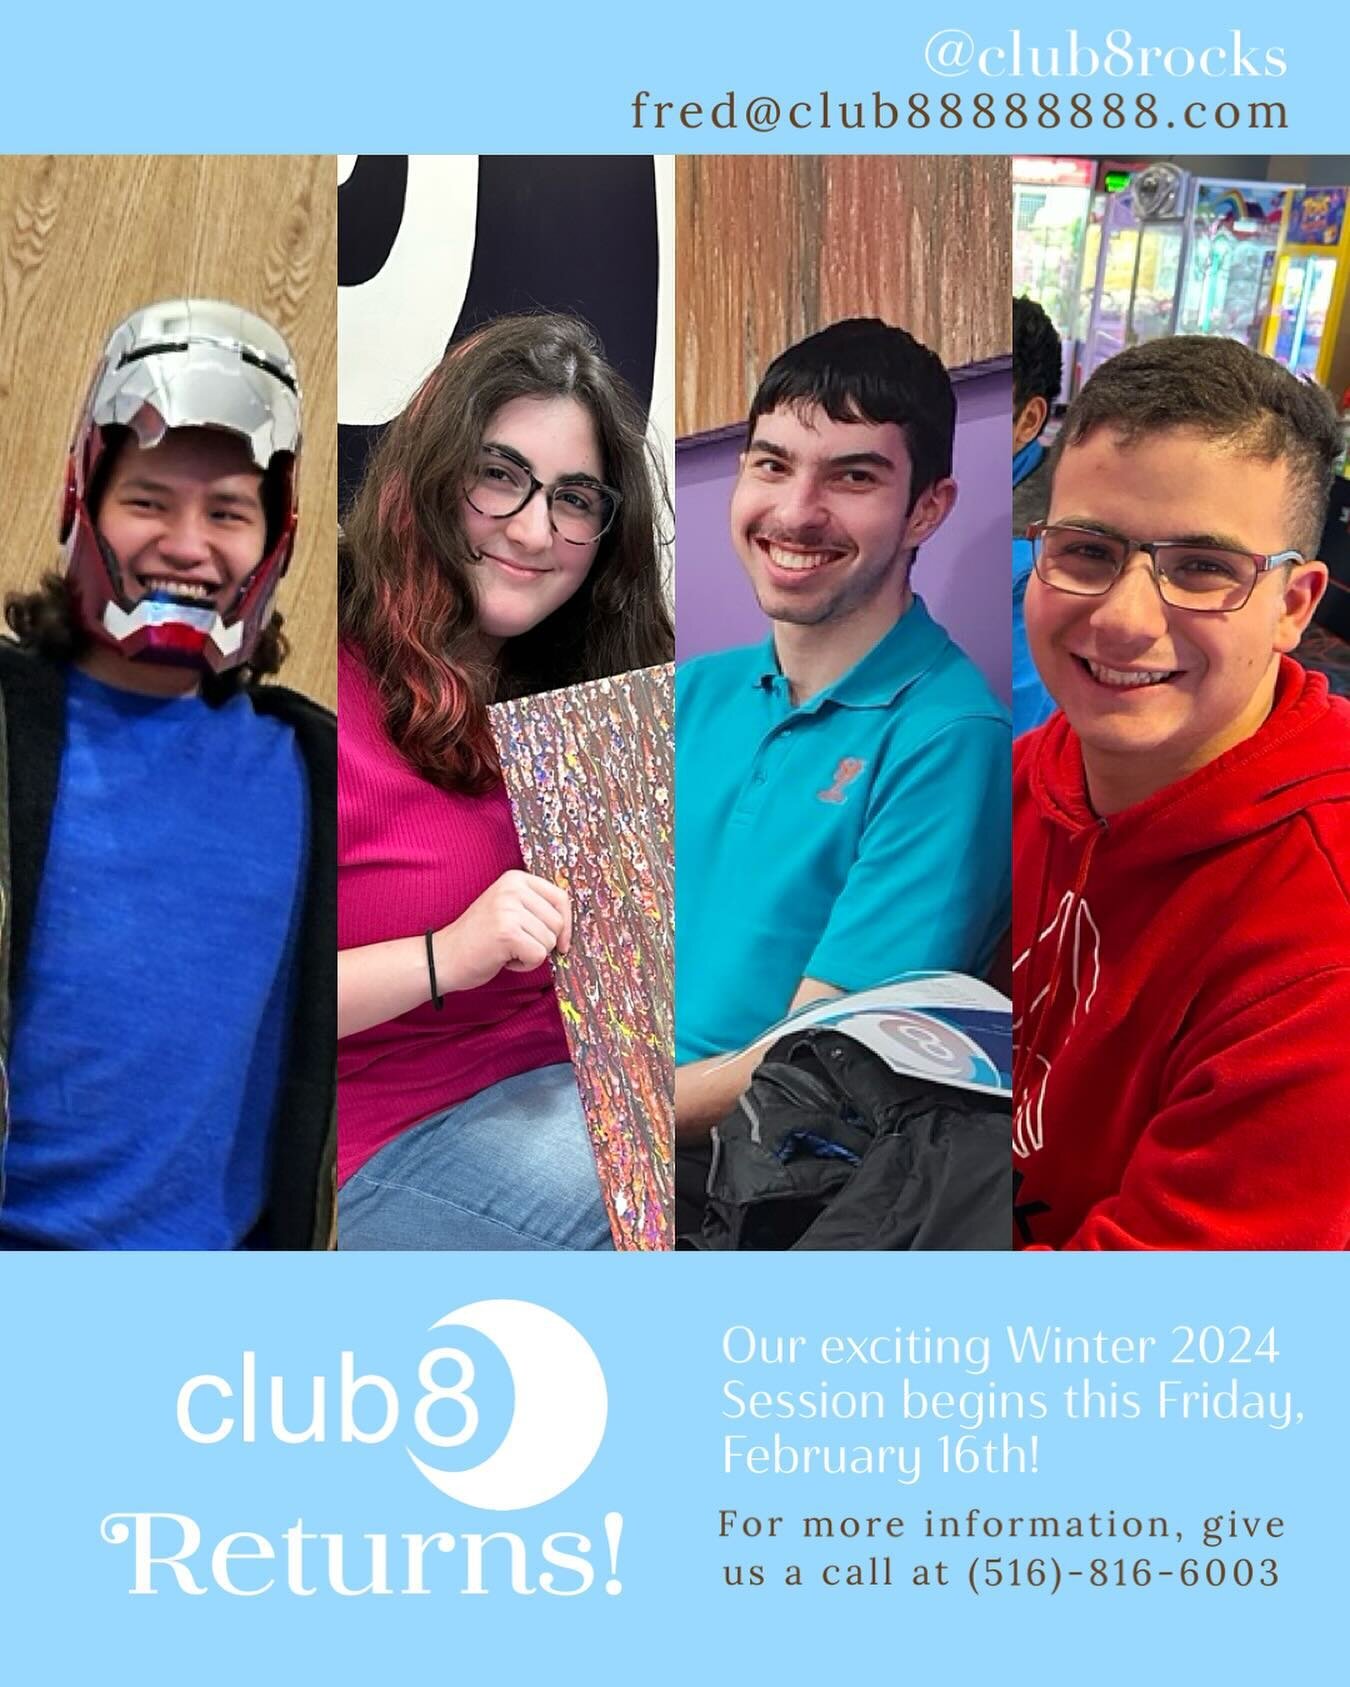 Club 8 returns this Friday, February 16th! For more information about Club 8, visit our website at club8.rocks or give us a call at (516)-816-6003! 👏✨🎱